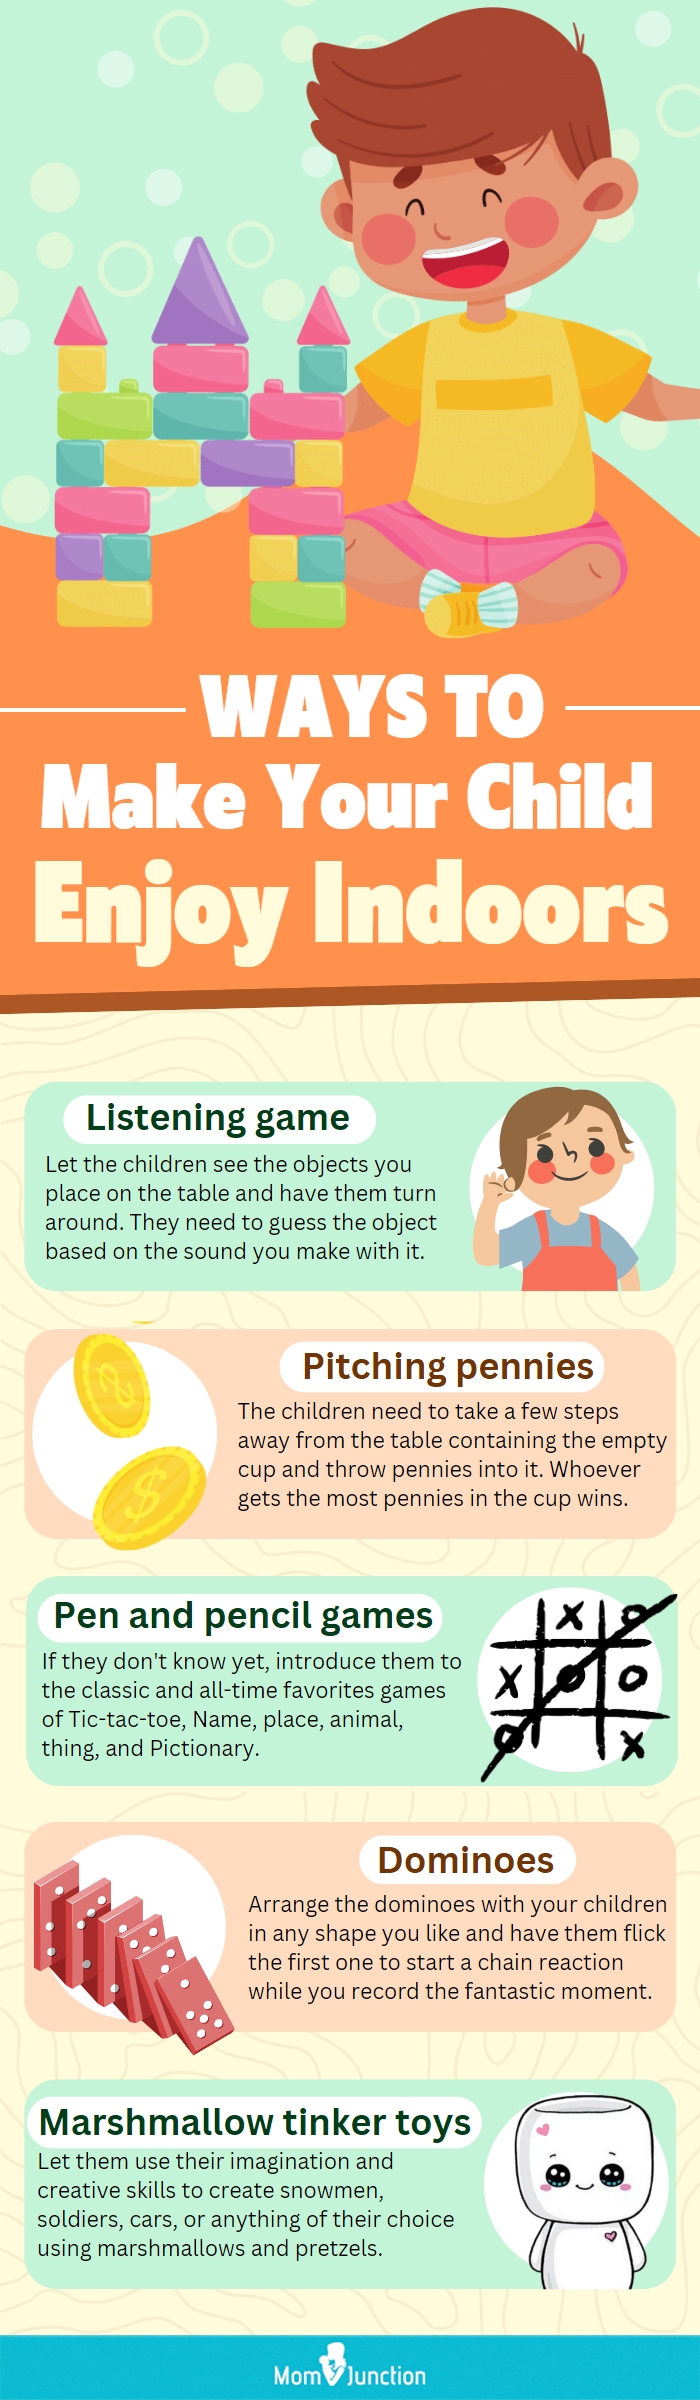 ways to make your child enjoy indoors (infographic)